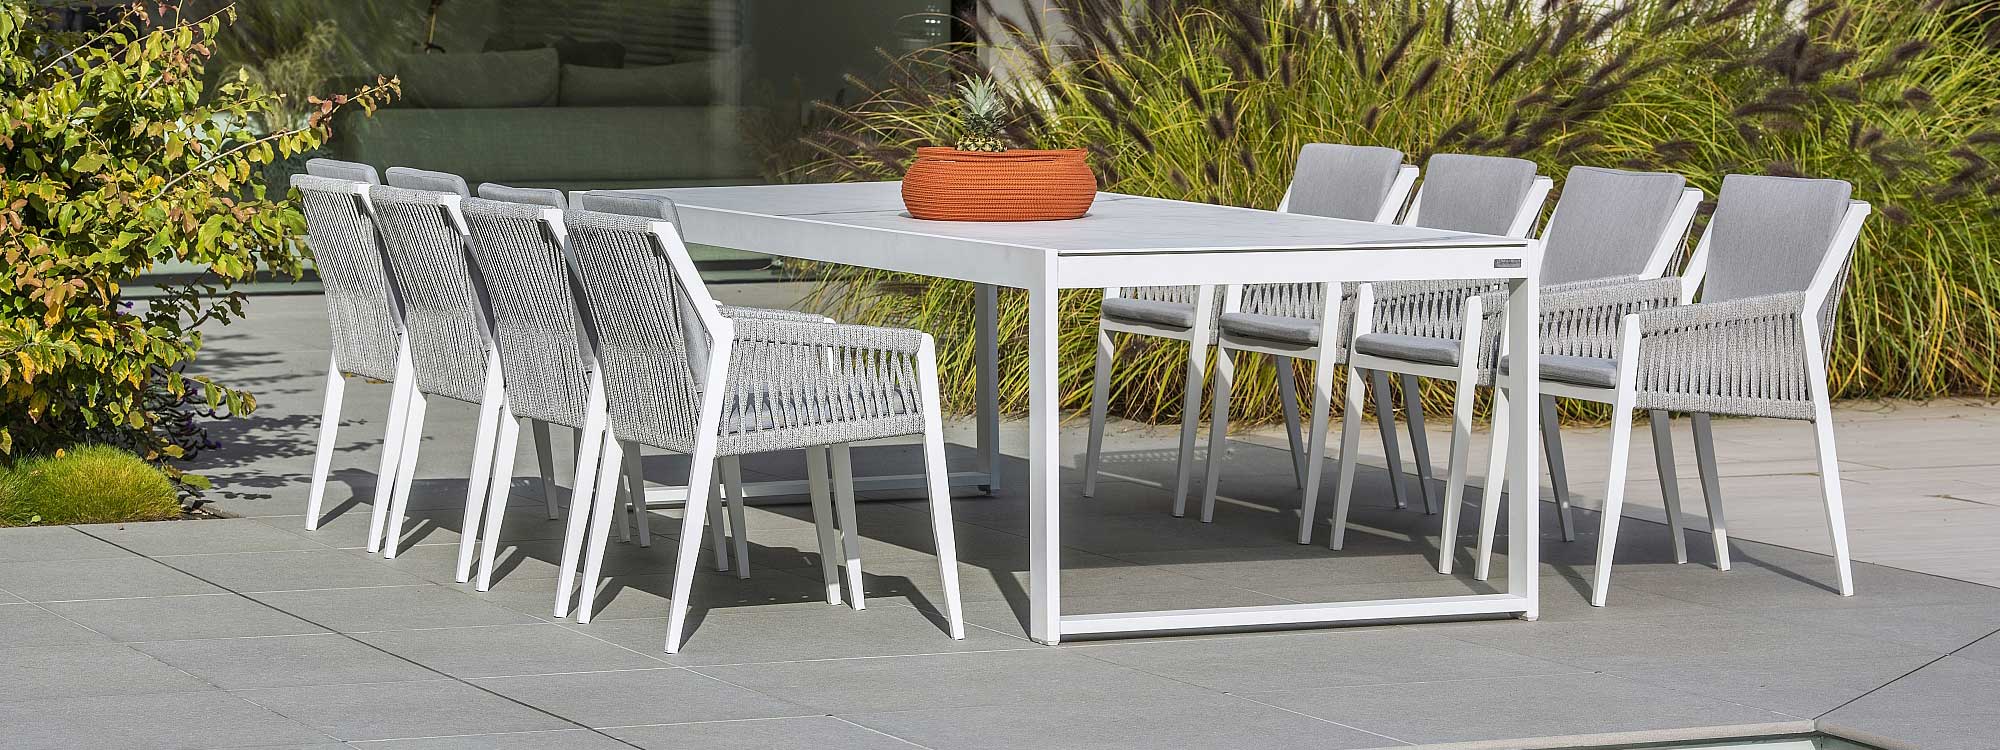 Vigo XL extending garden table is a ceramic dining table in modern outdoor table materials by Jati & Kebon luxury garden furniture company.